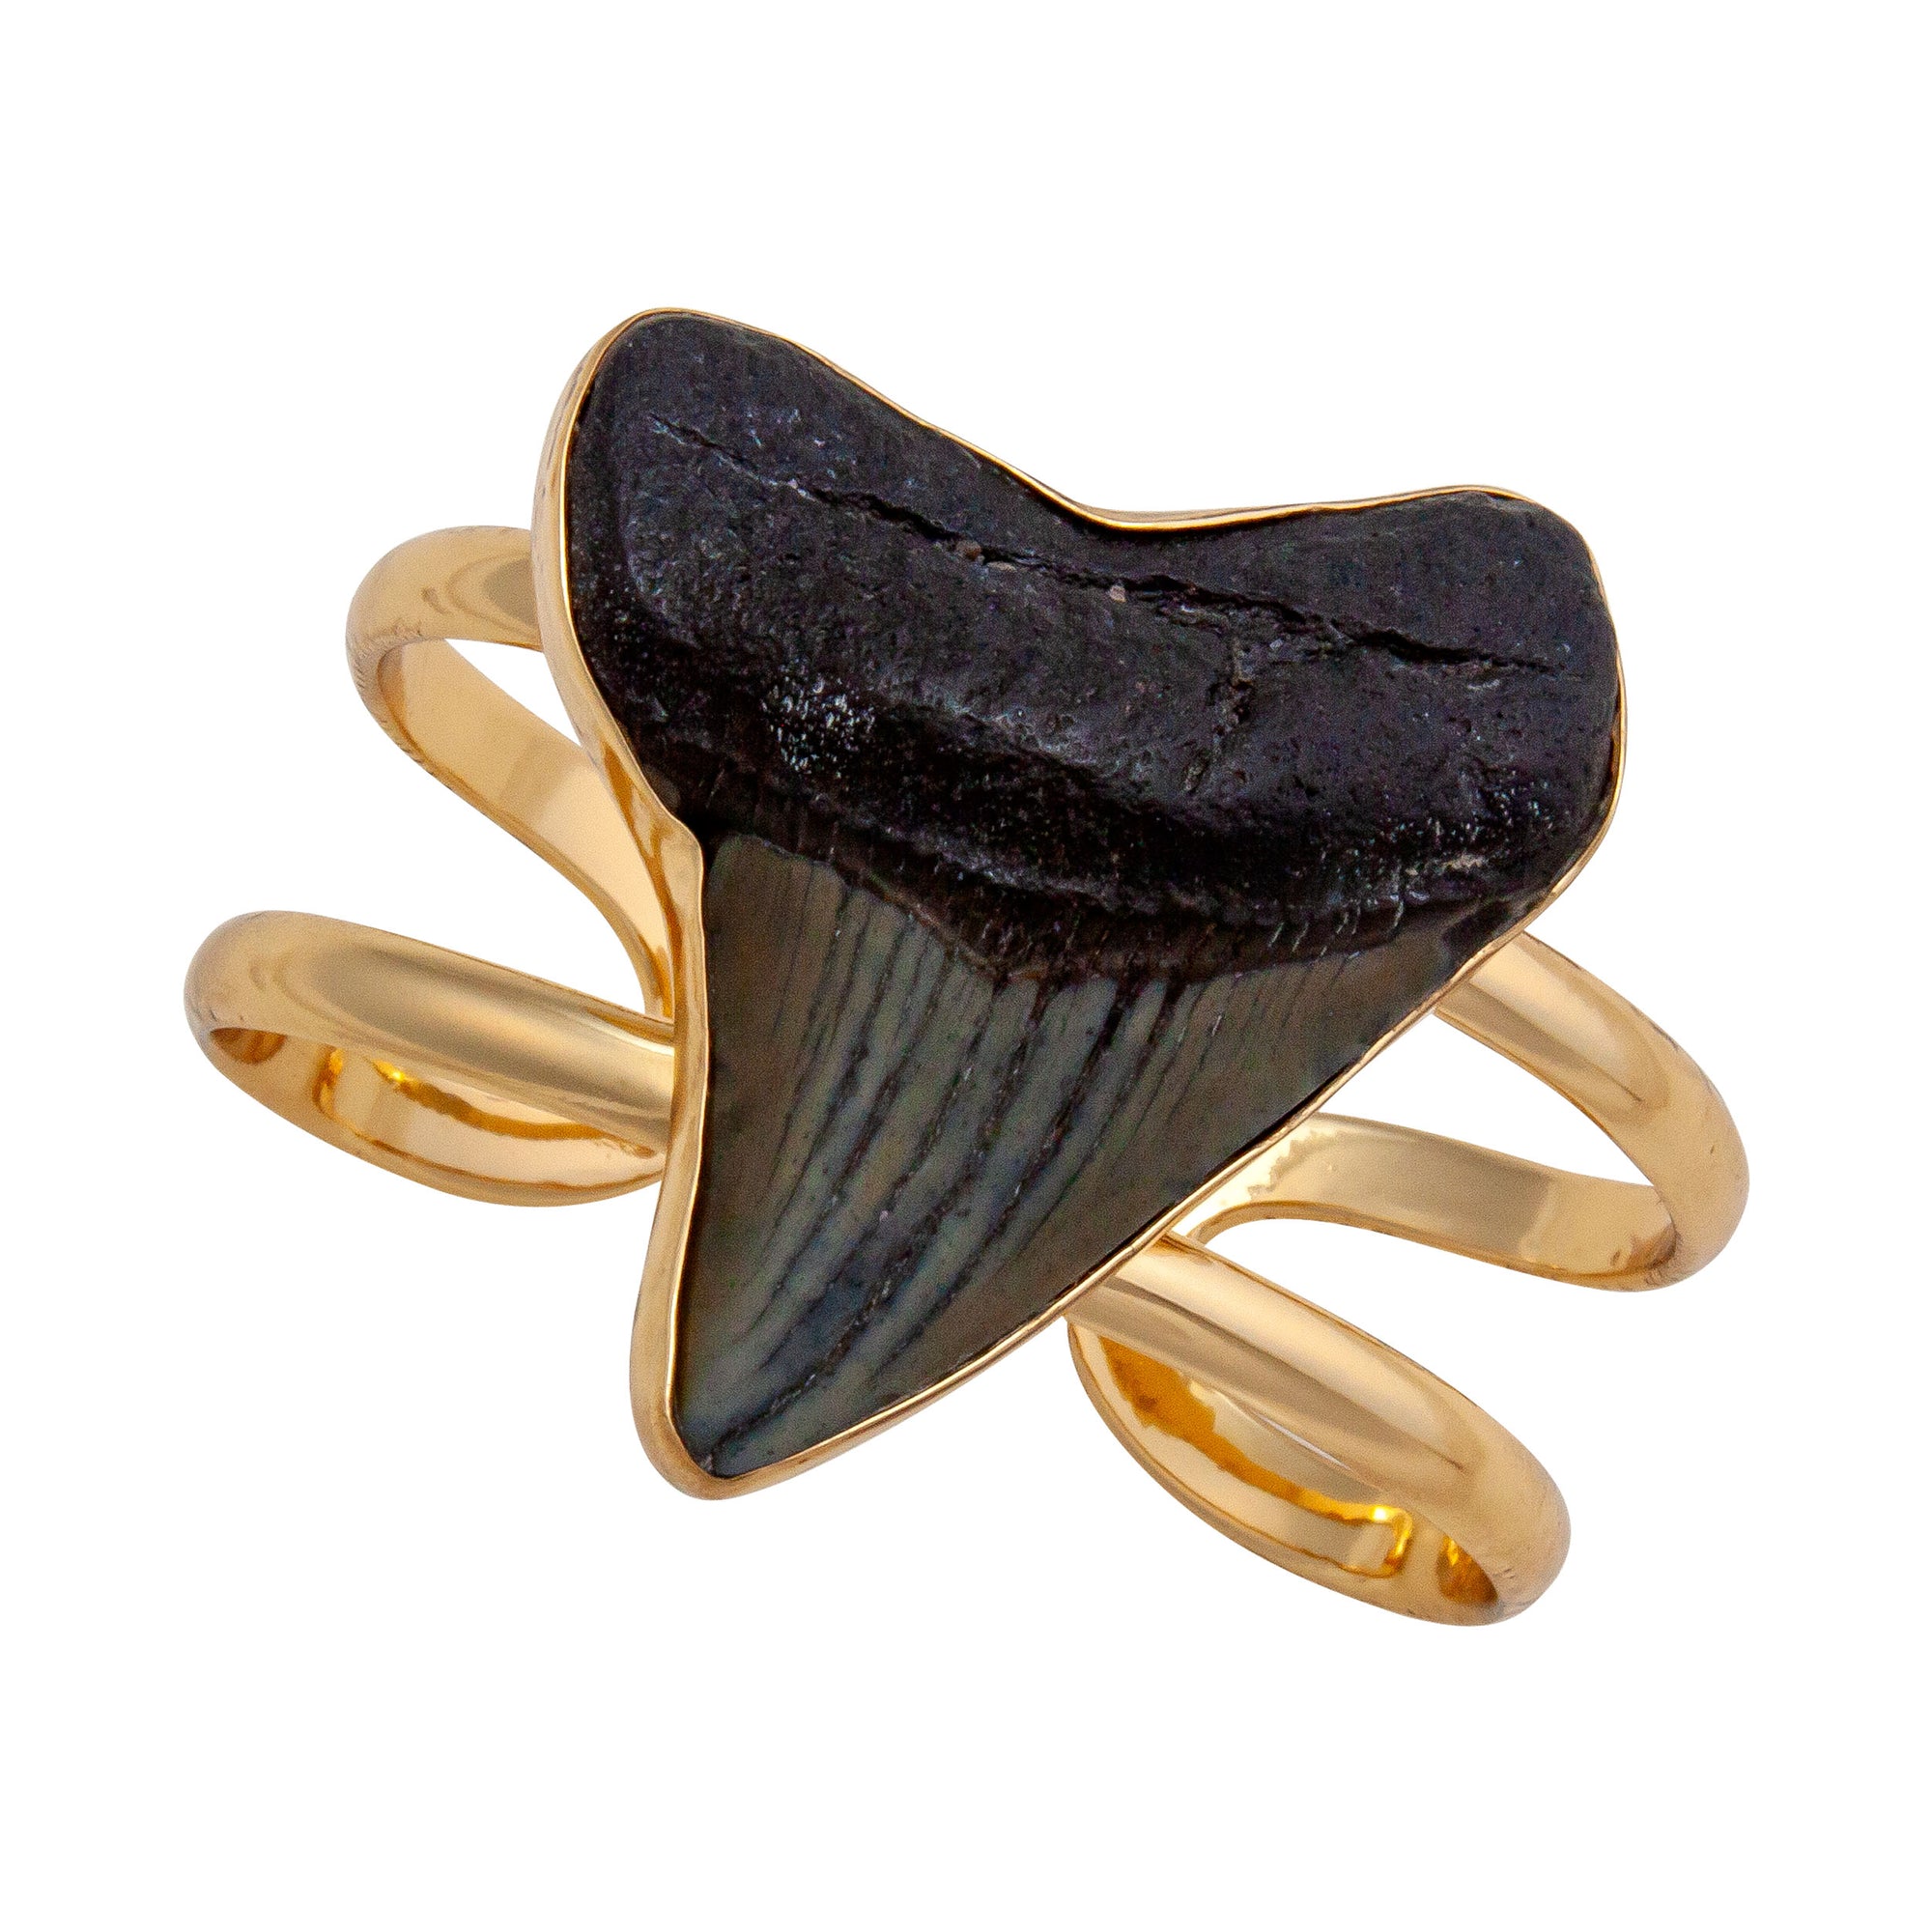 Alchemia Shark Tooth Double Band Adjustable Cuff | Charles Albert Jewelry